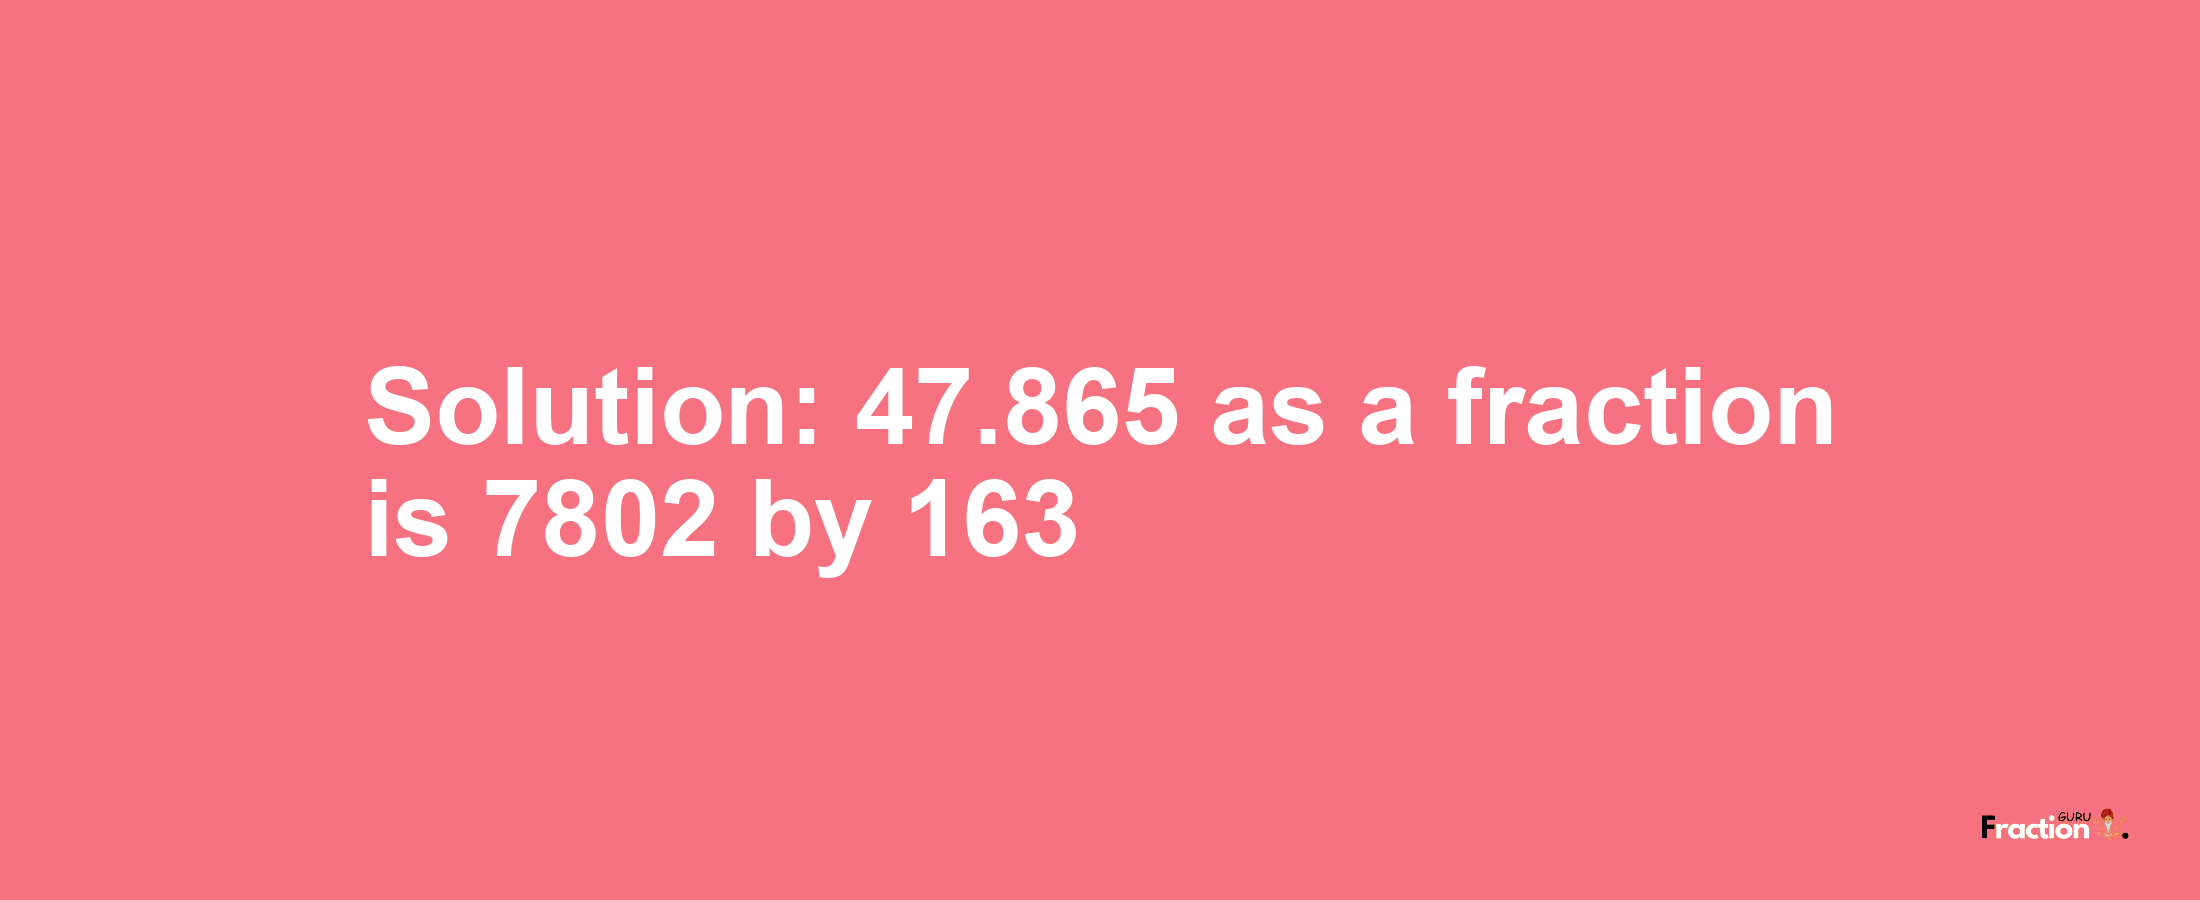 Solution:47.865 as a fraction is 7802/163